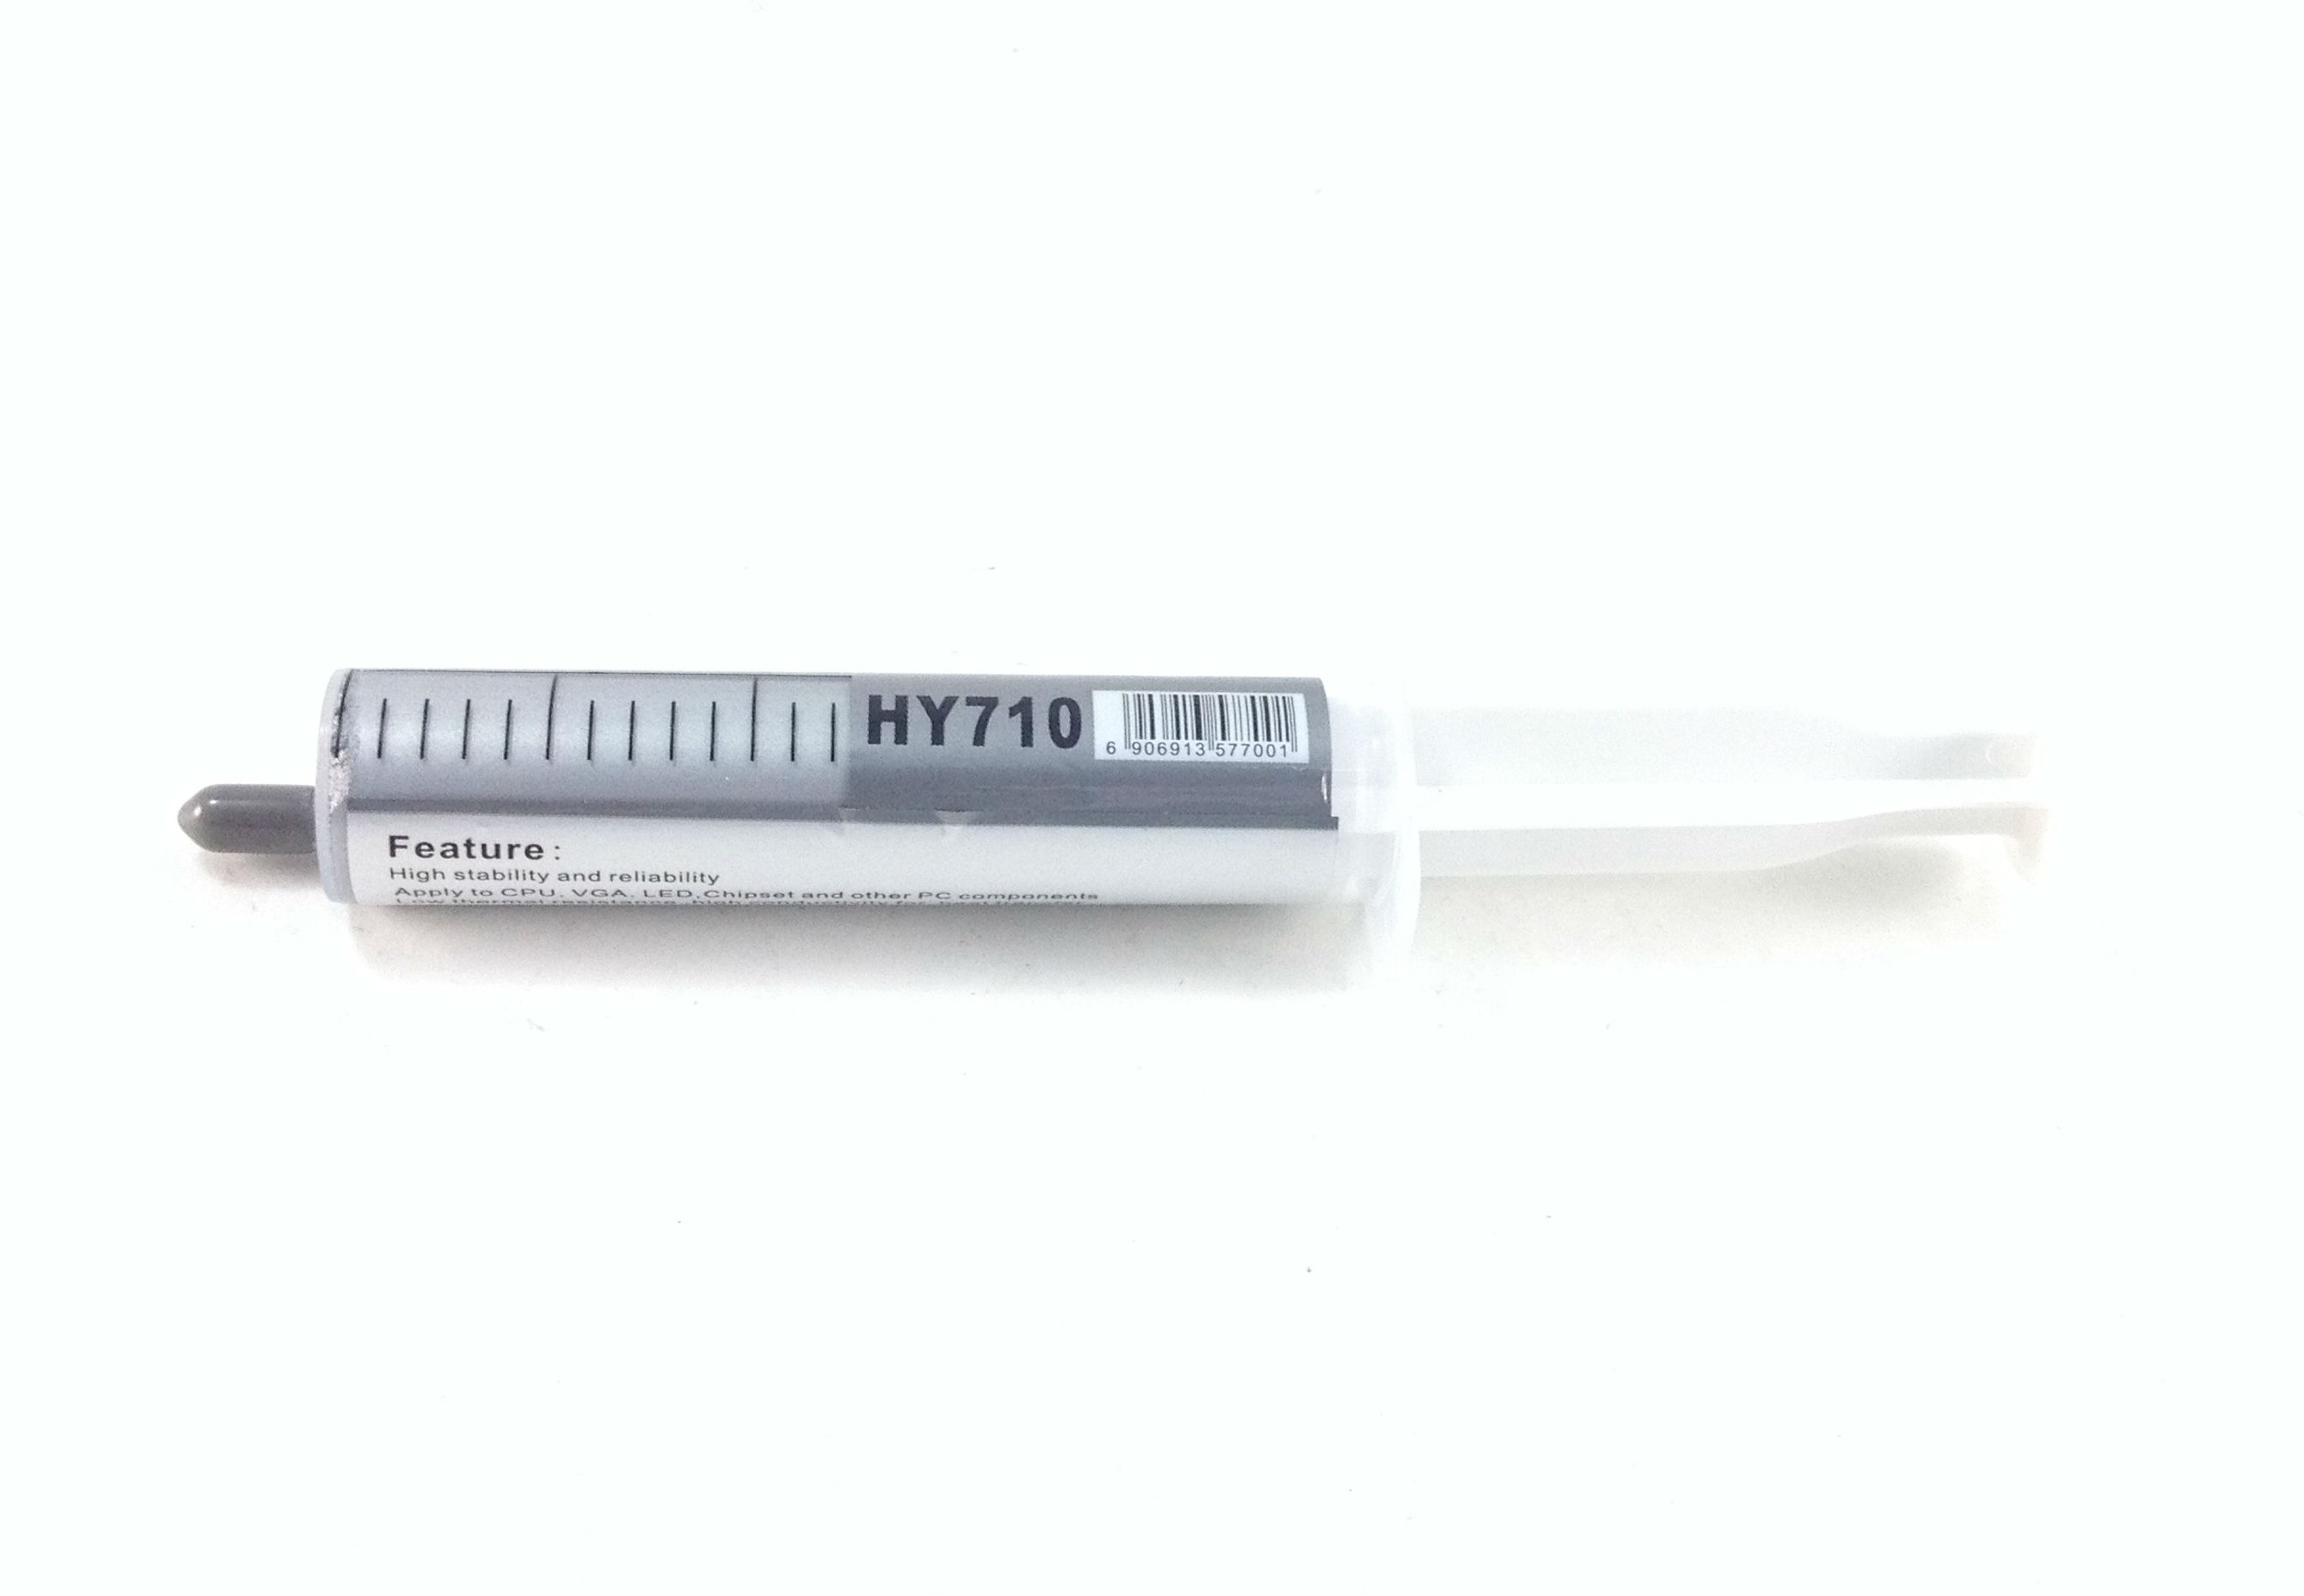 High Performance Silver Thermal Grease Compound 25 GRAM Syringe (HY710)